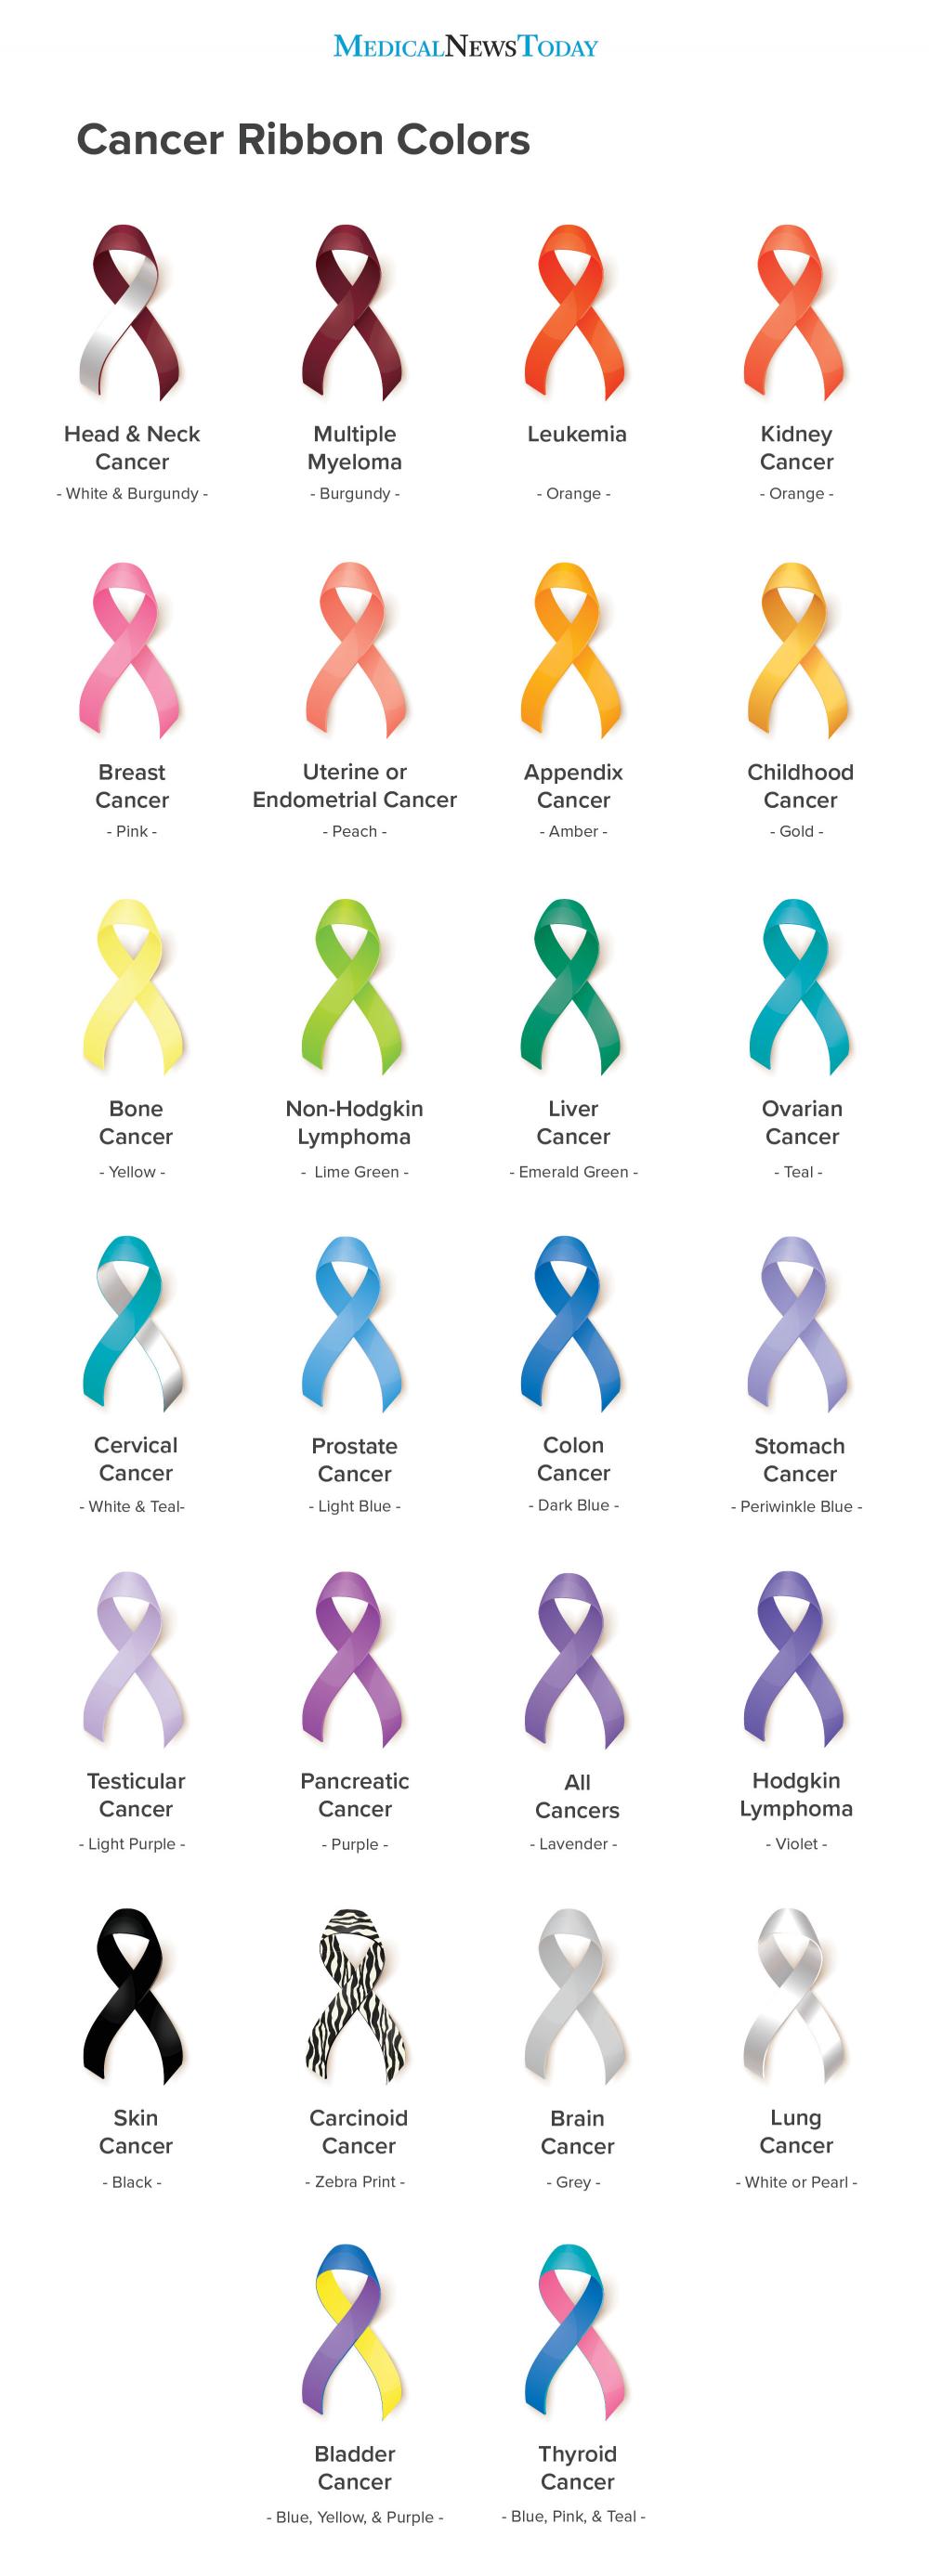 Blue and Yellow Ribbon Logo - Cancer ribbon colors: Chart and guide